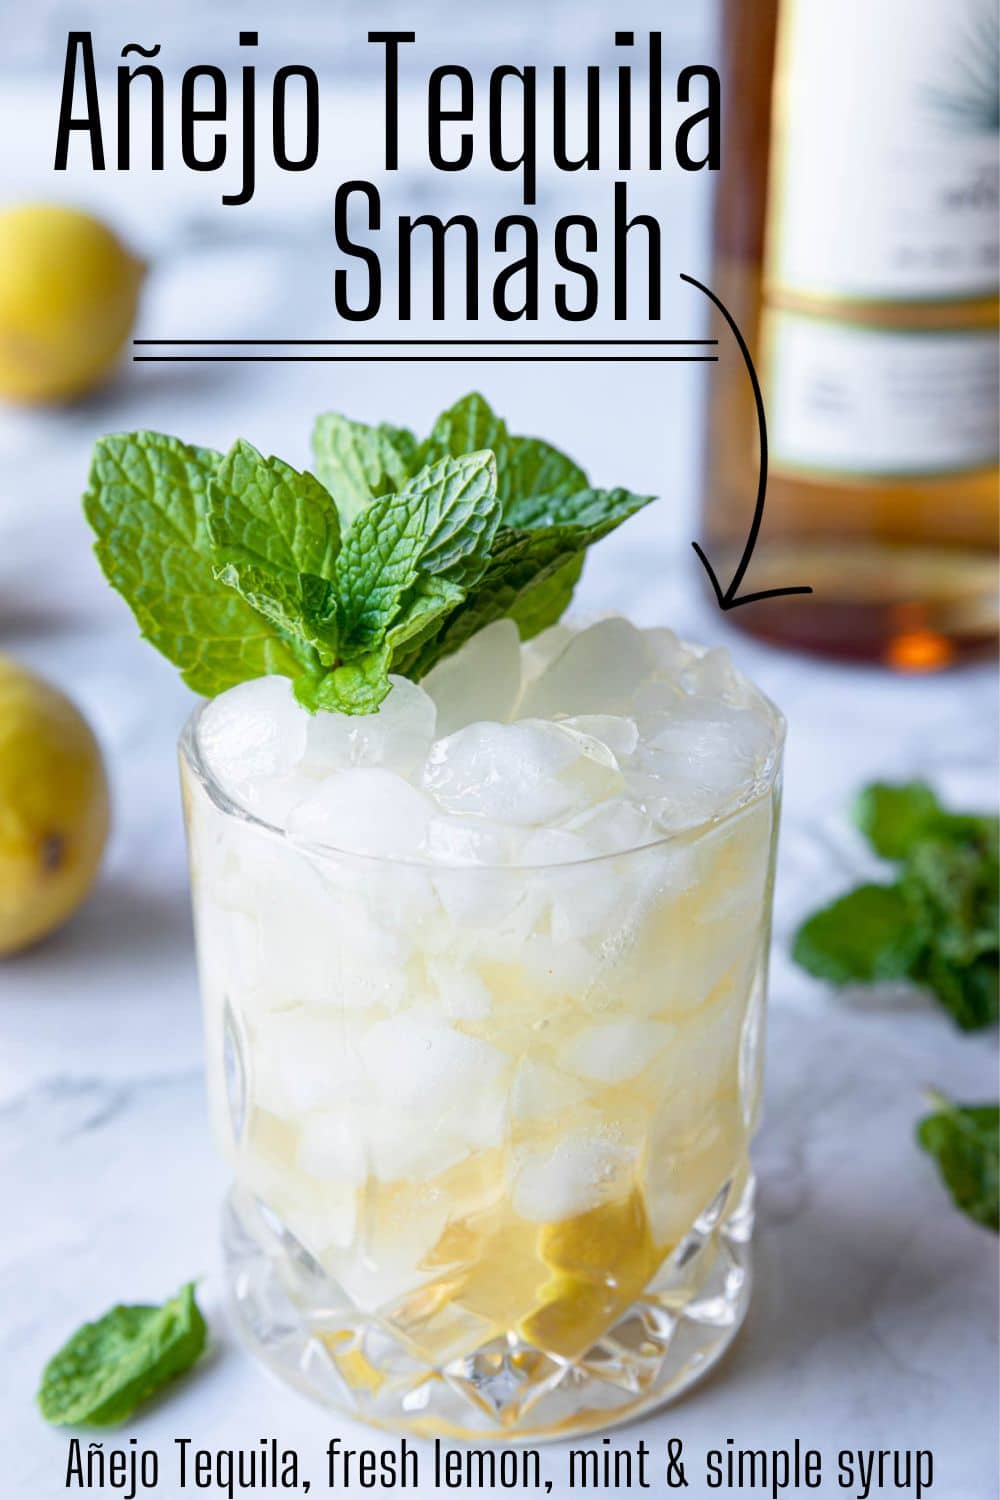 Pinterest image for Anejo Tequila Smash with text overlay